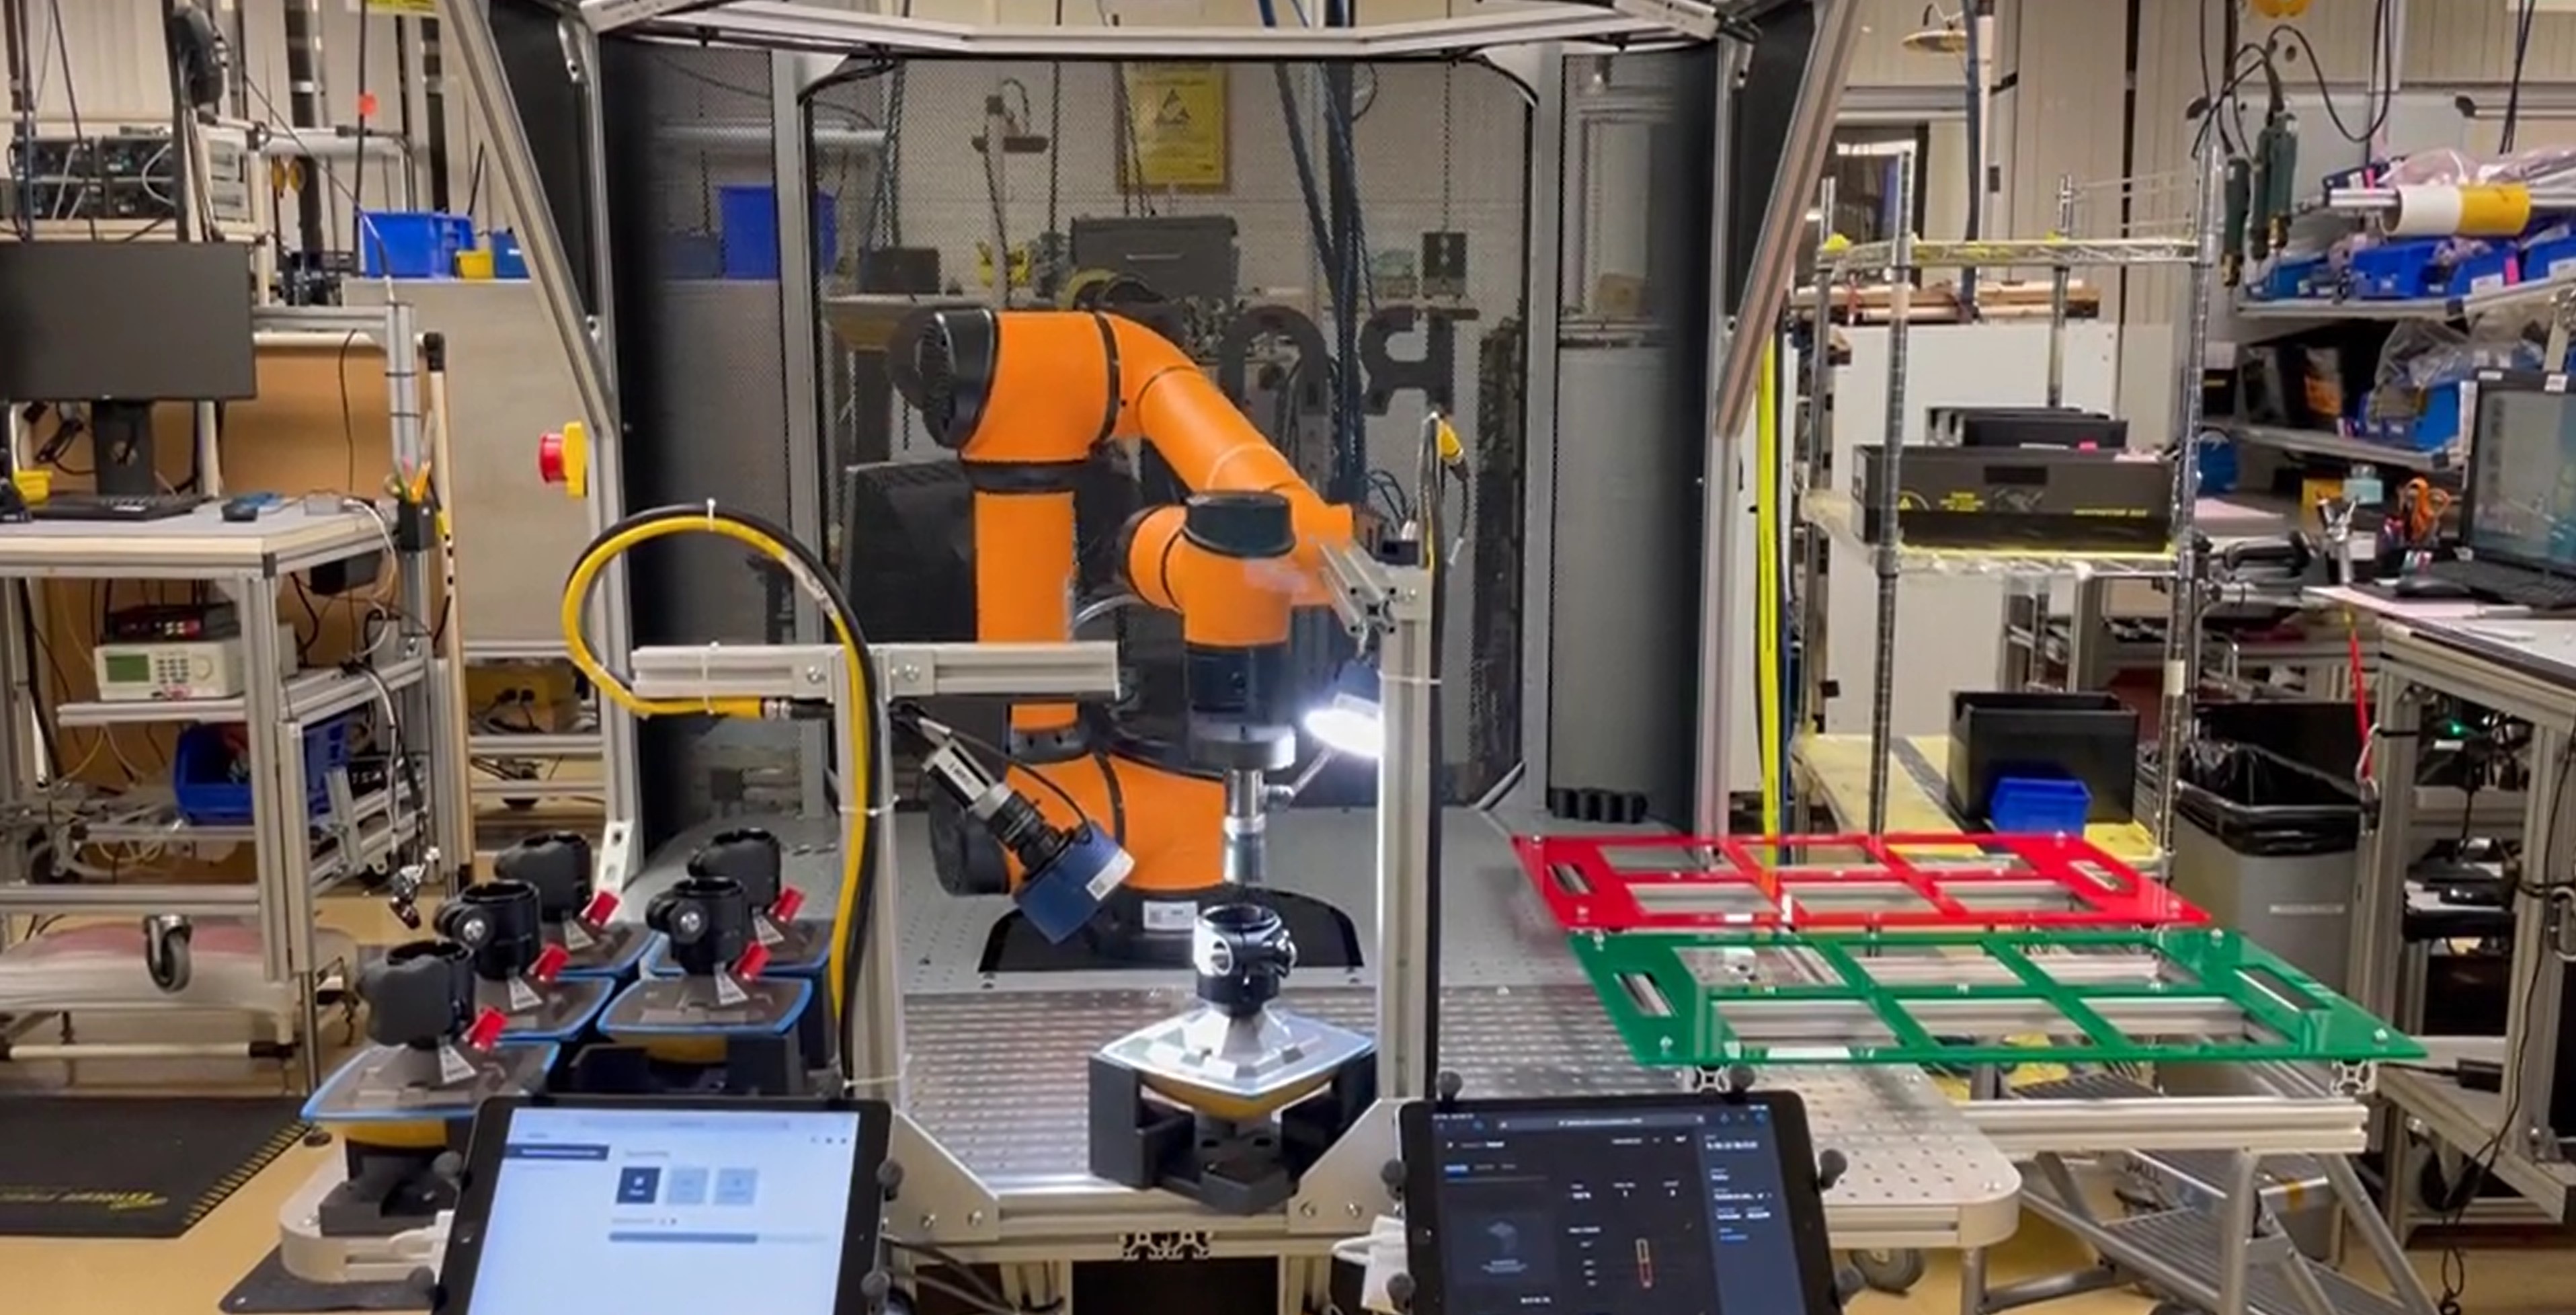 An orange Rapid Machine Operator moves Topcon GNSS antennas from an input tray to an inspection system for an Elementary camera to perform inspection. There are accept and reject trays on the right side of the work cell for sorting units after inspection.